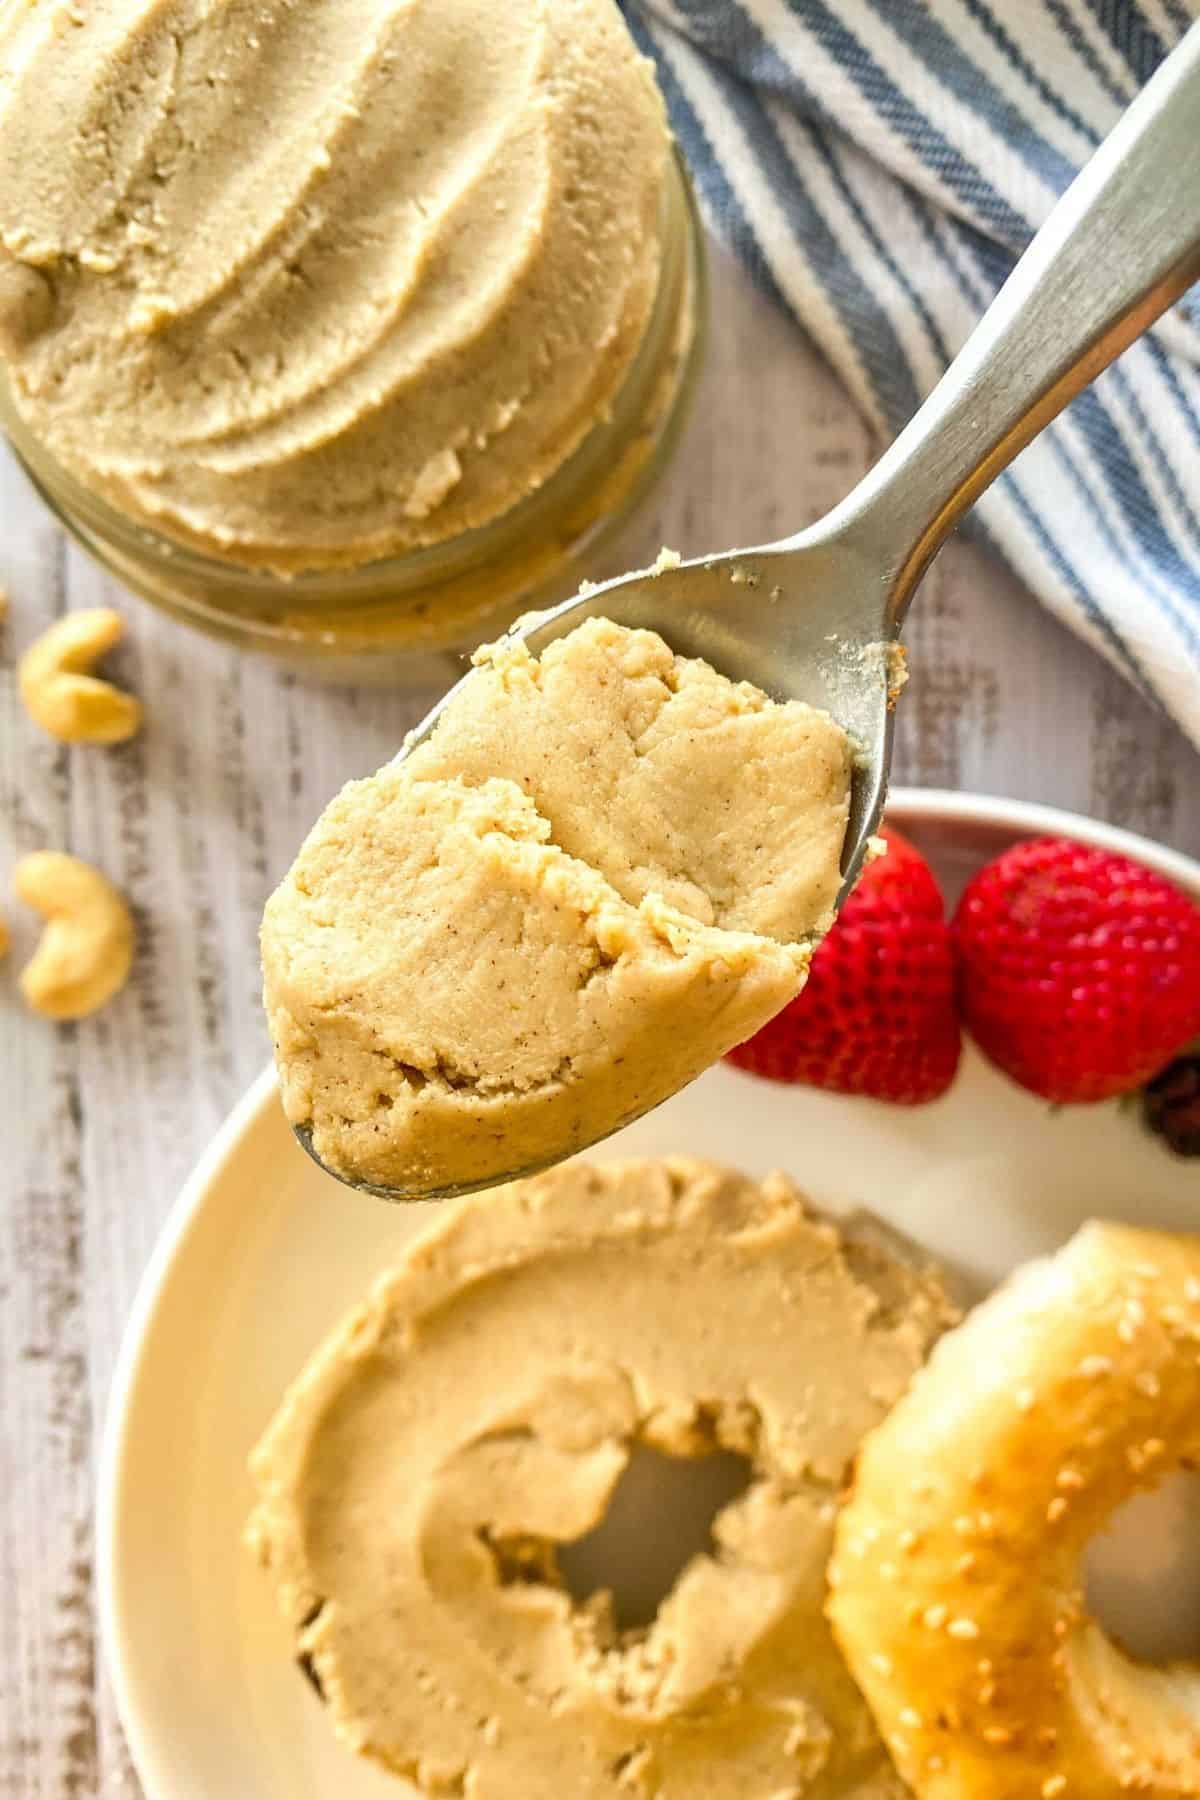 Spoonful of cashew butter held up with bagel spread with cashew butter below it.